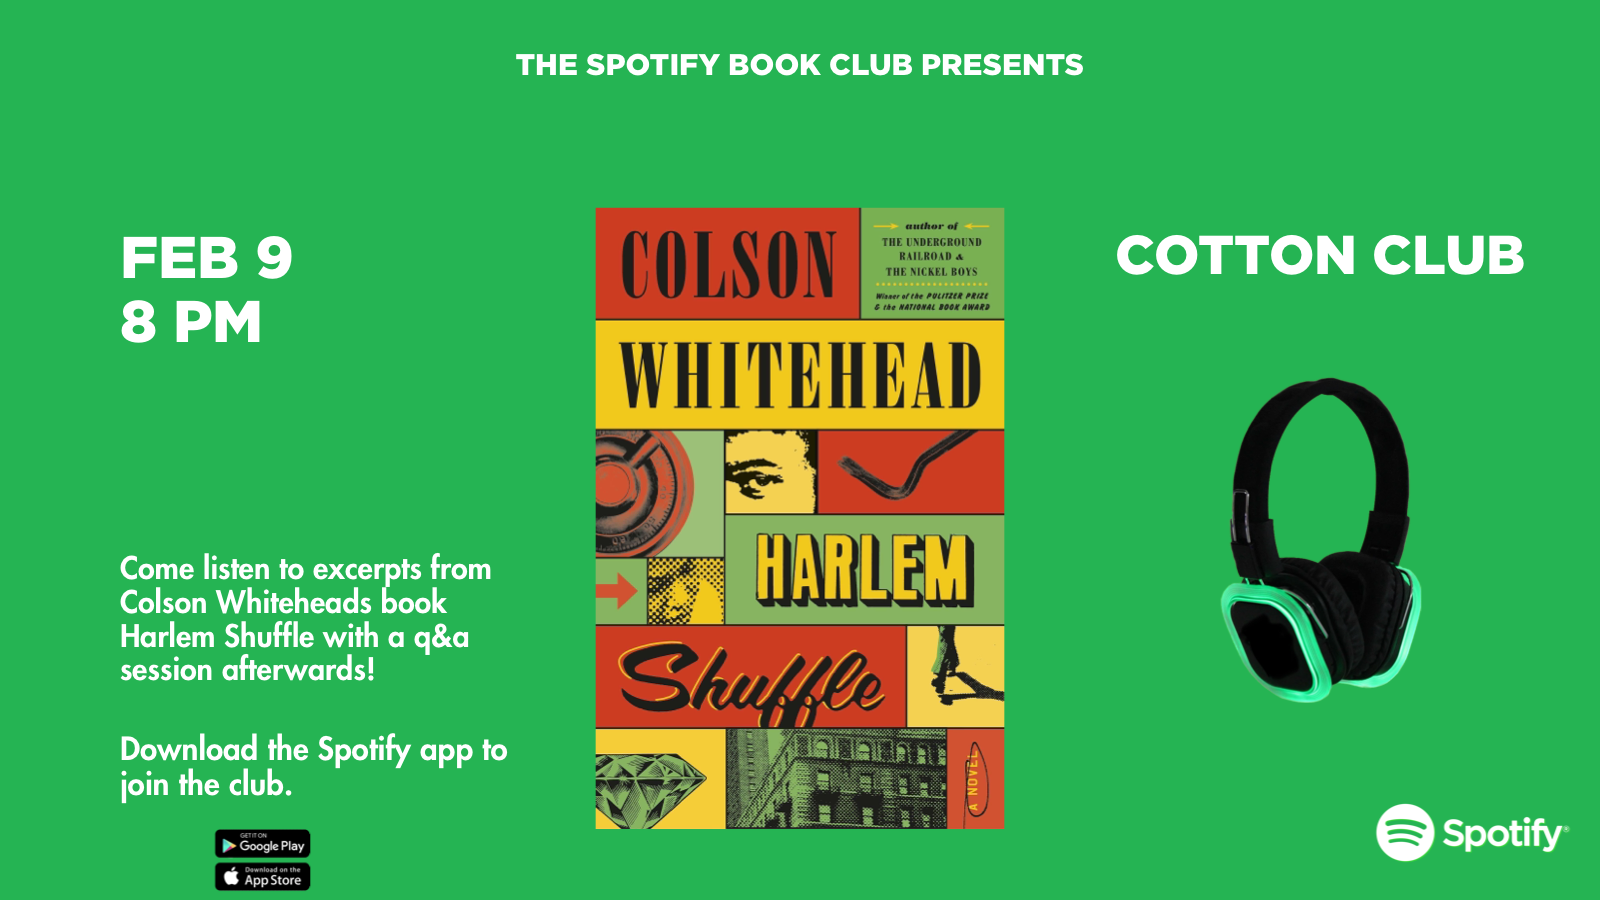  The Spotify Book Club is a silent party in a real club where listeners come to hear excerpts from the "Book of the Month" and have a Q&amp;A session with the author. 